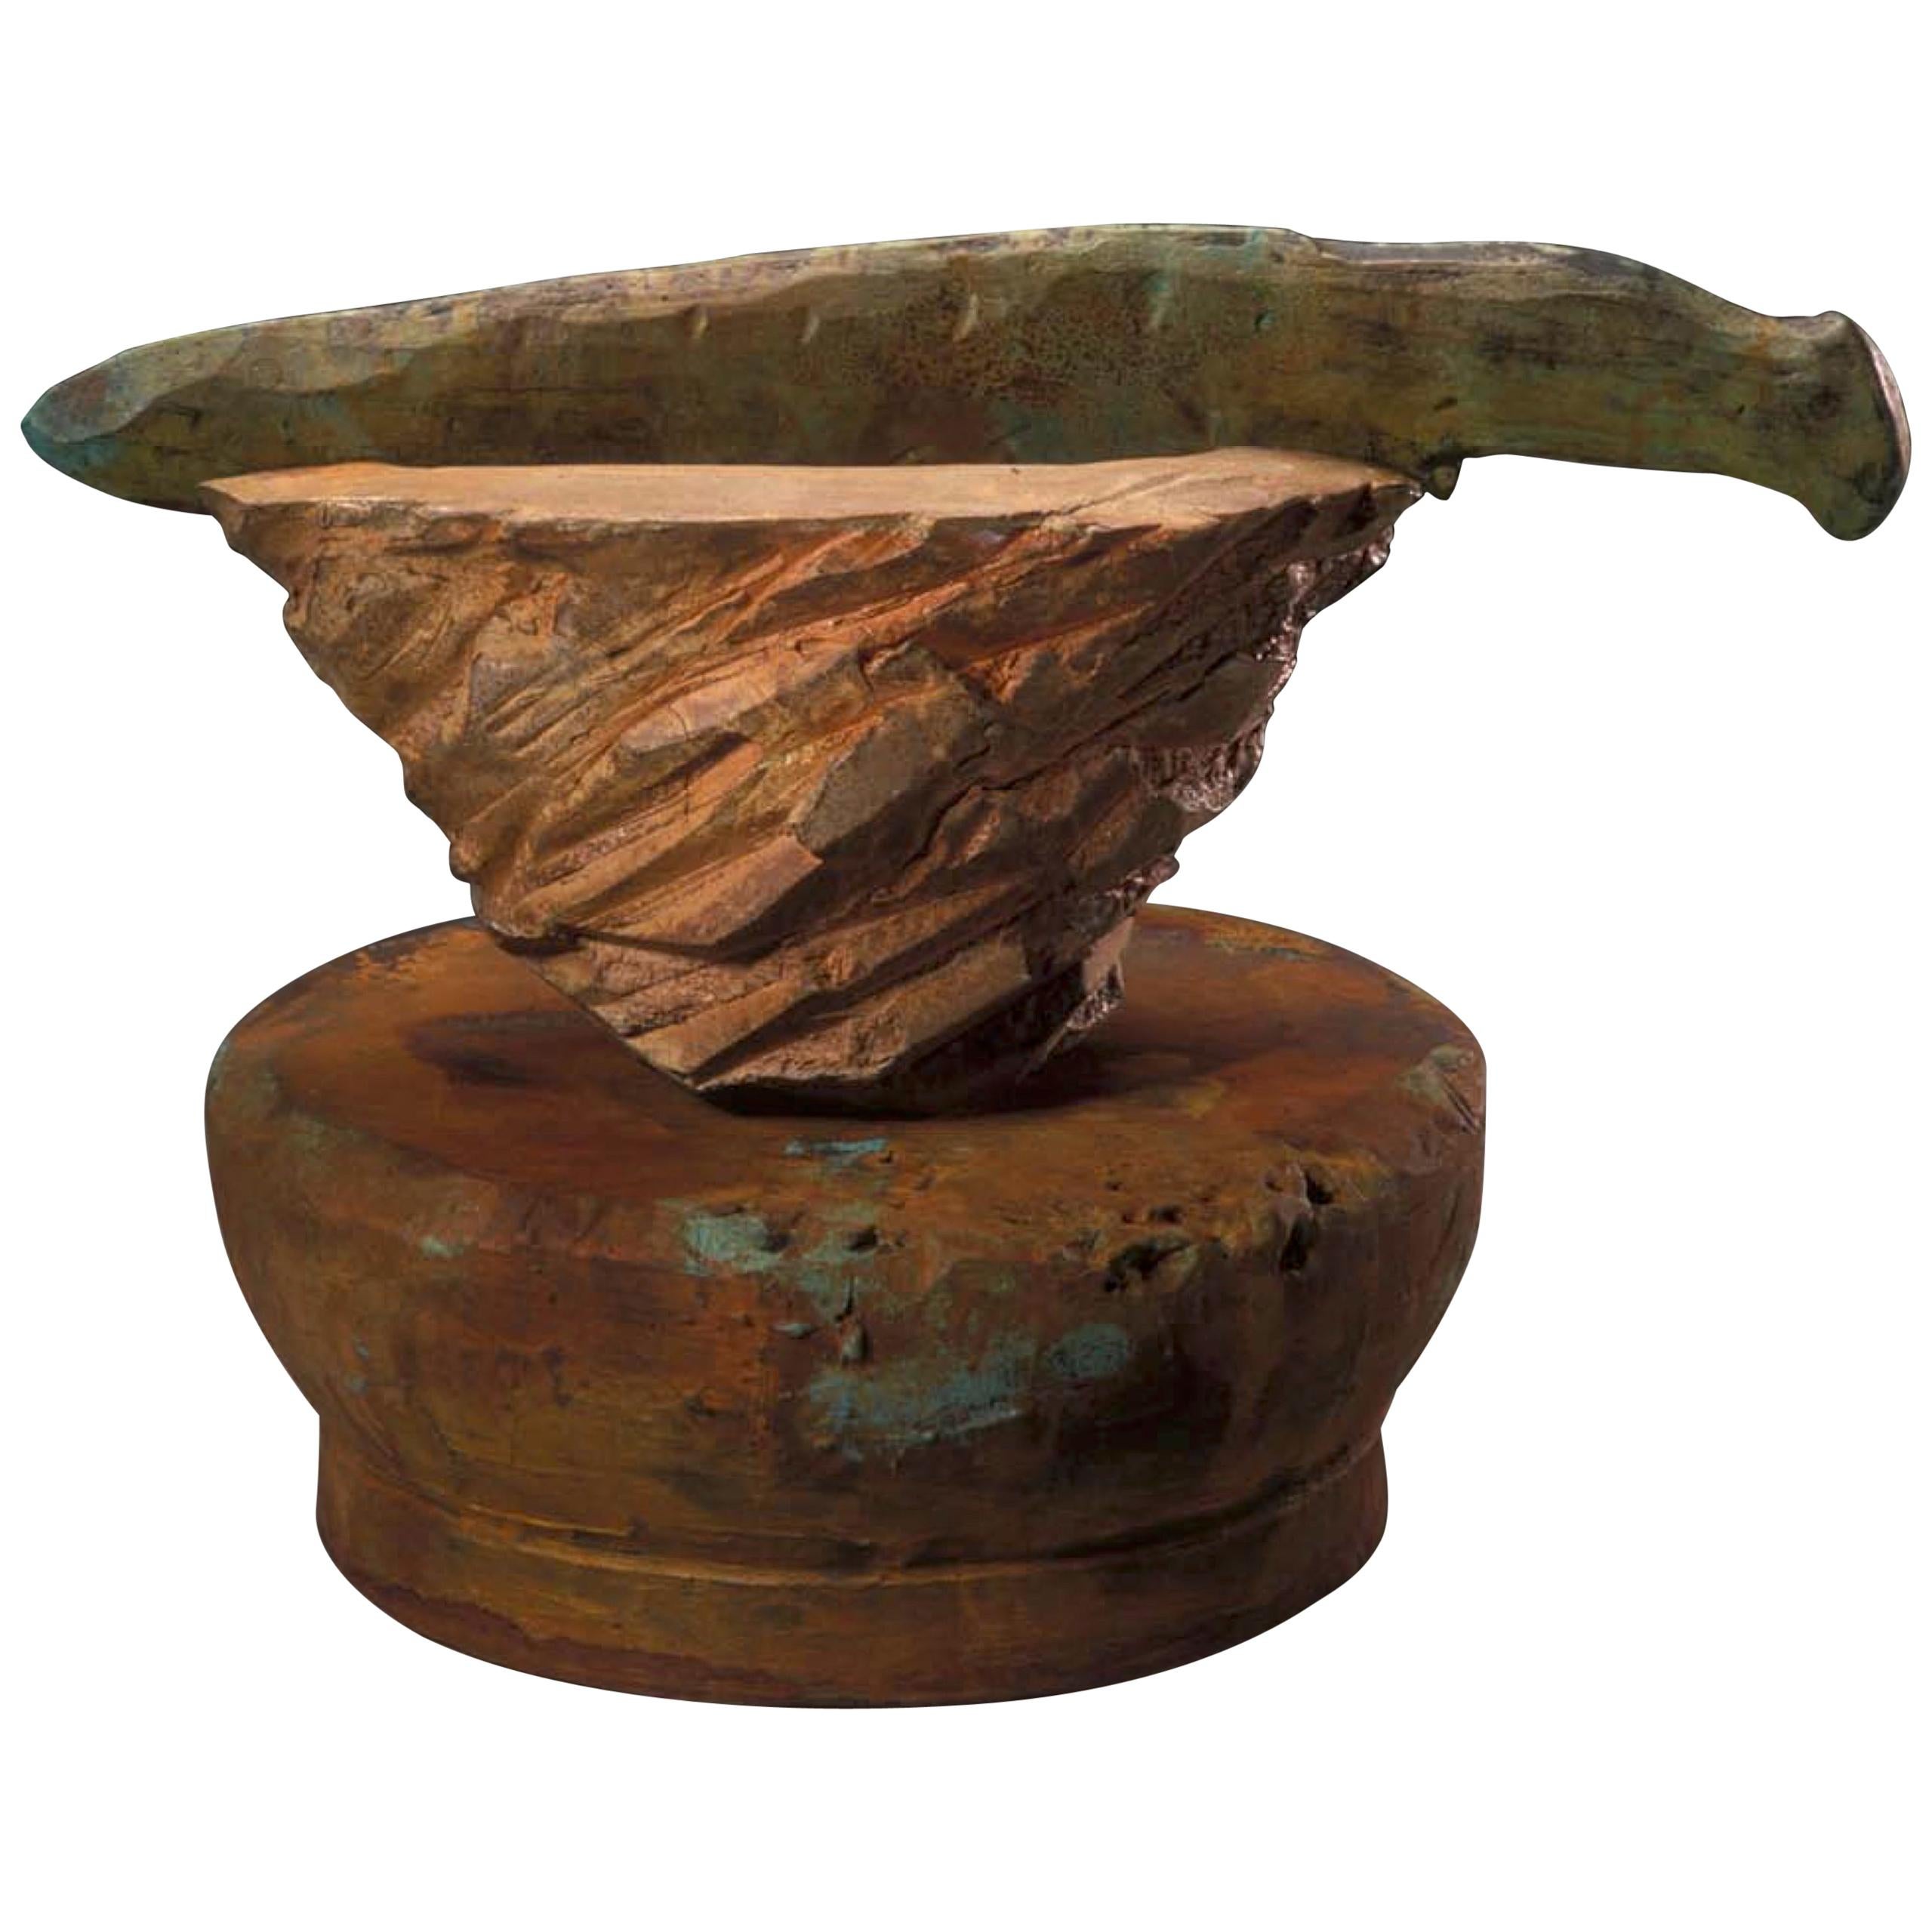 Richard Hirsch and Peter Voulkos Ceramic Altar Bowl with Weapon, 2001